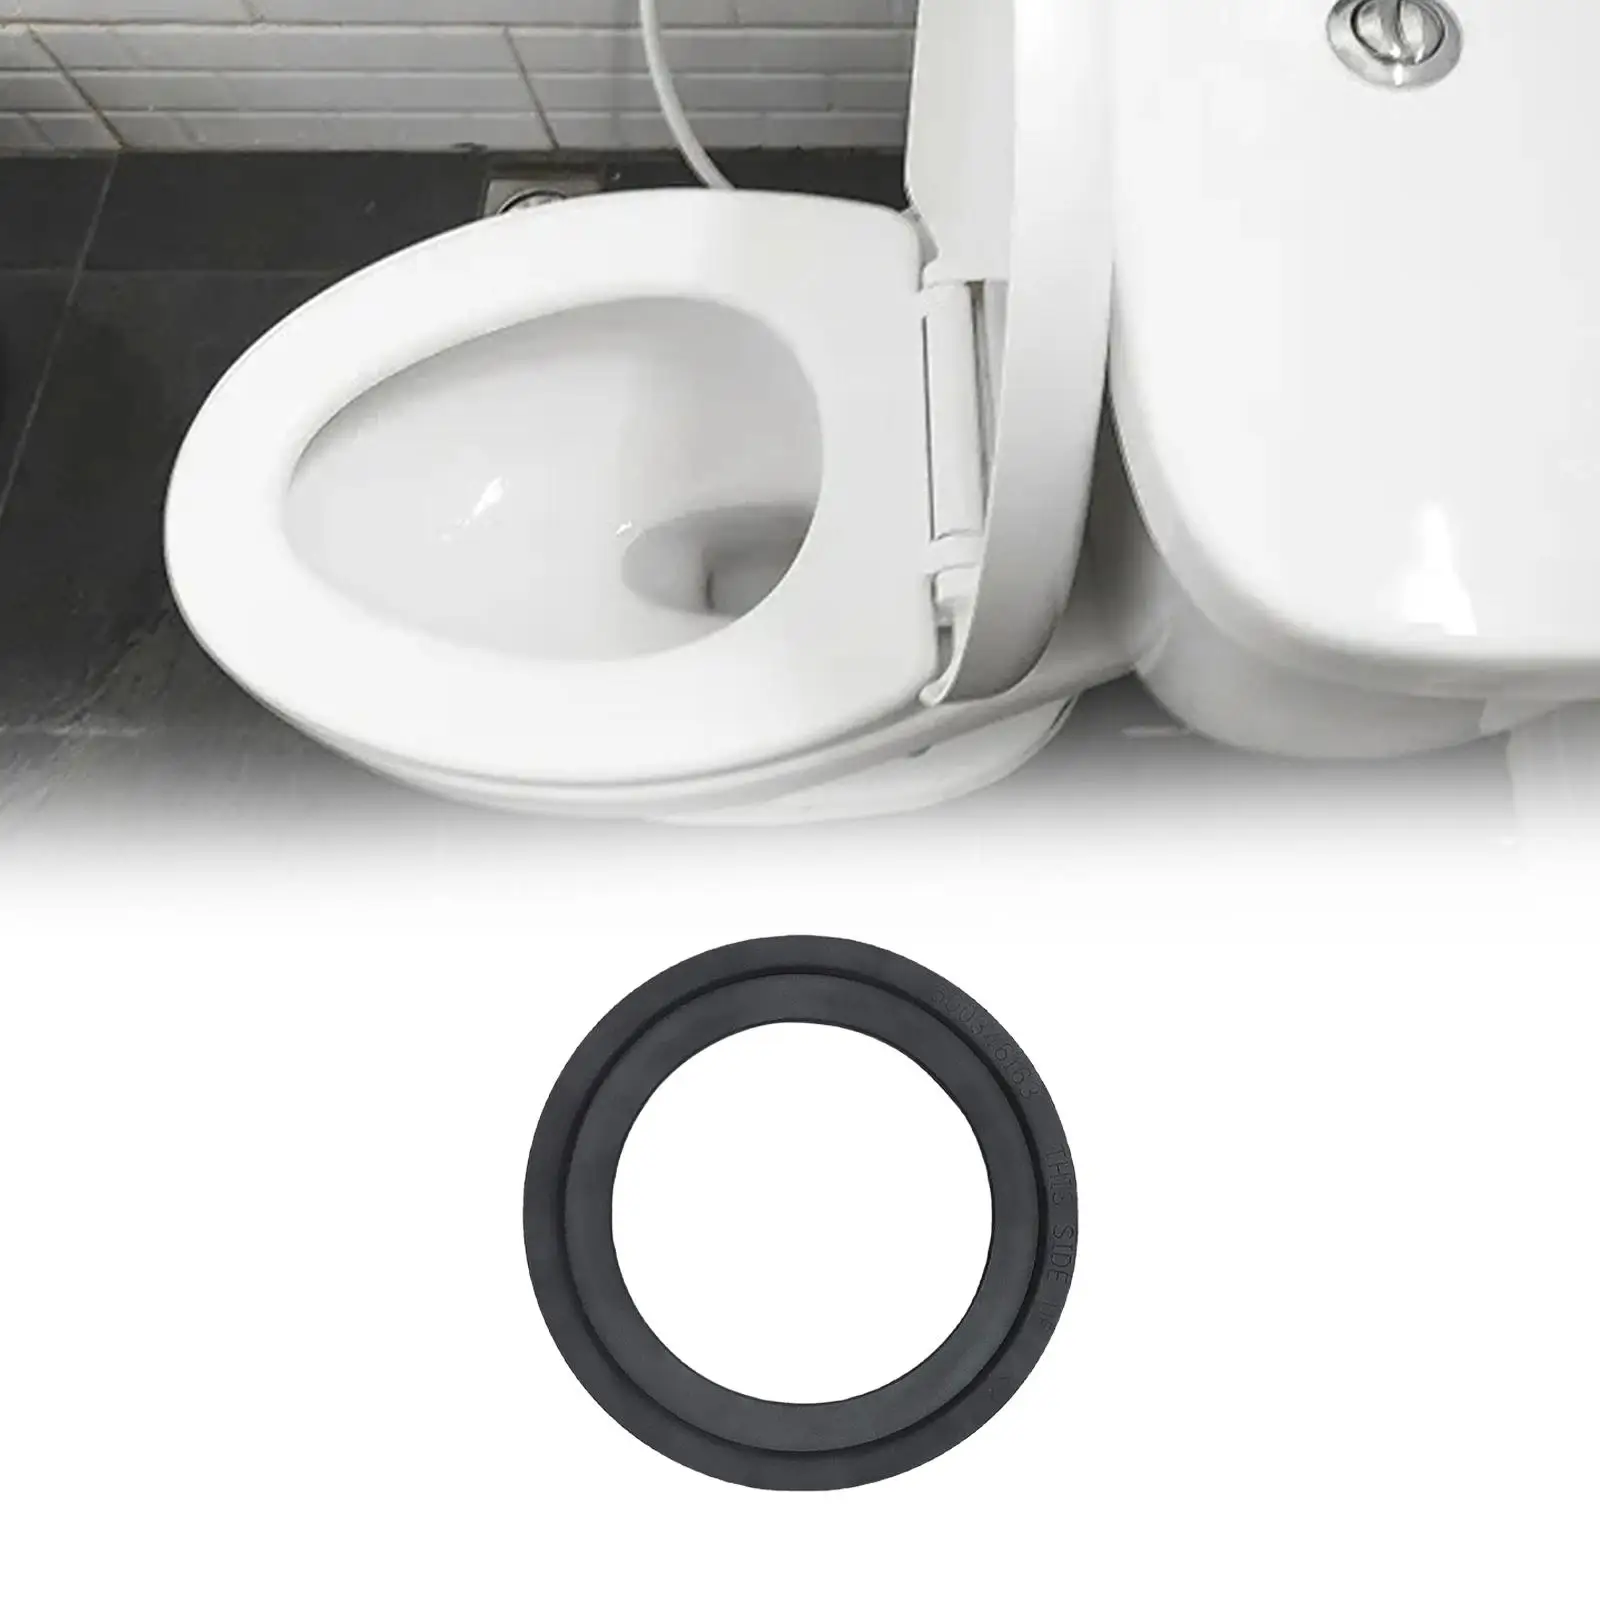 RV Toilet Seal Gaskets Replace Parts for Dometic 300 310 320 RV Toilet Parts High Performance Solve The Leakage Problem